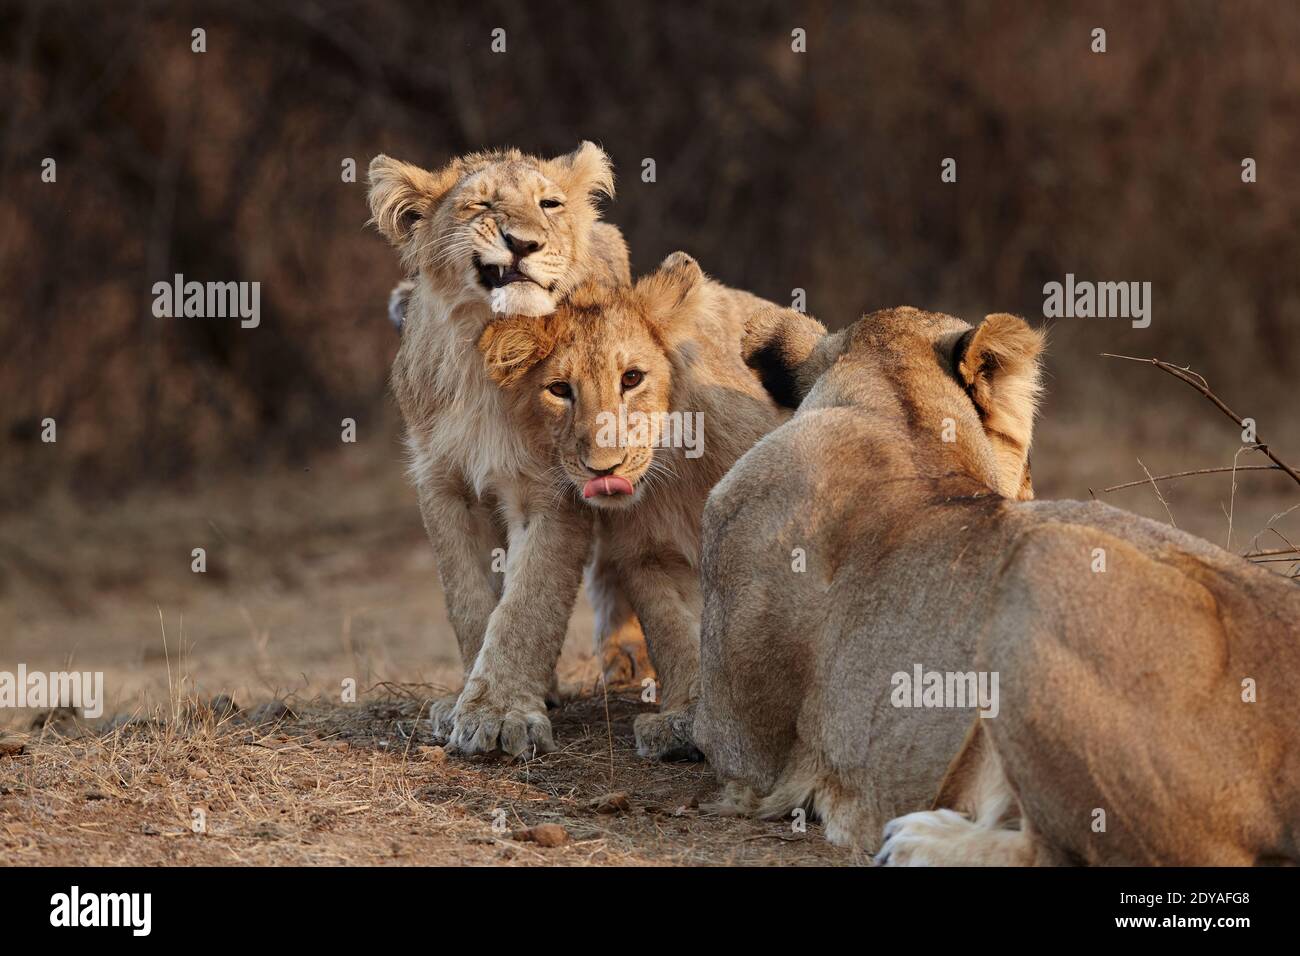 Asiatic Lioness Playful cubs looking at camera, Gir forest India. Stock Photo